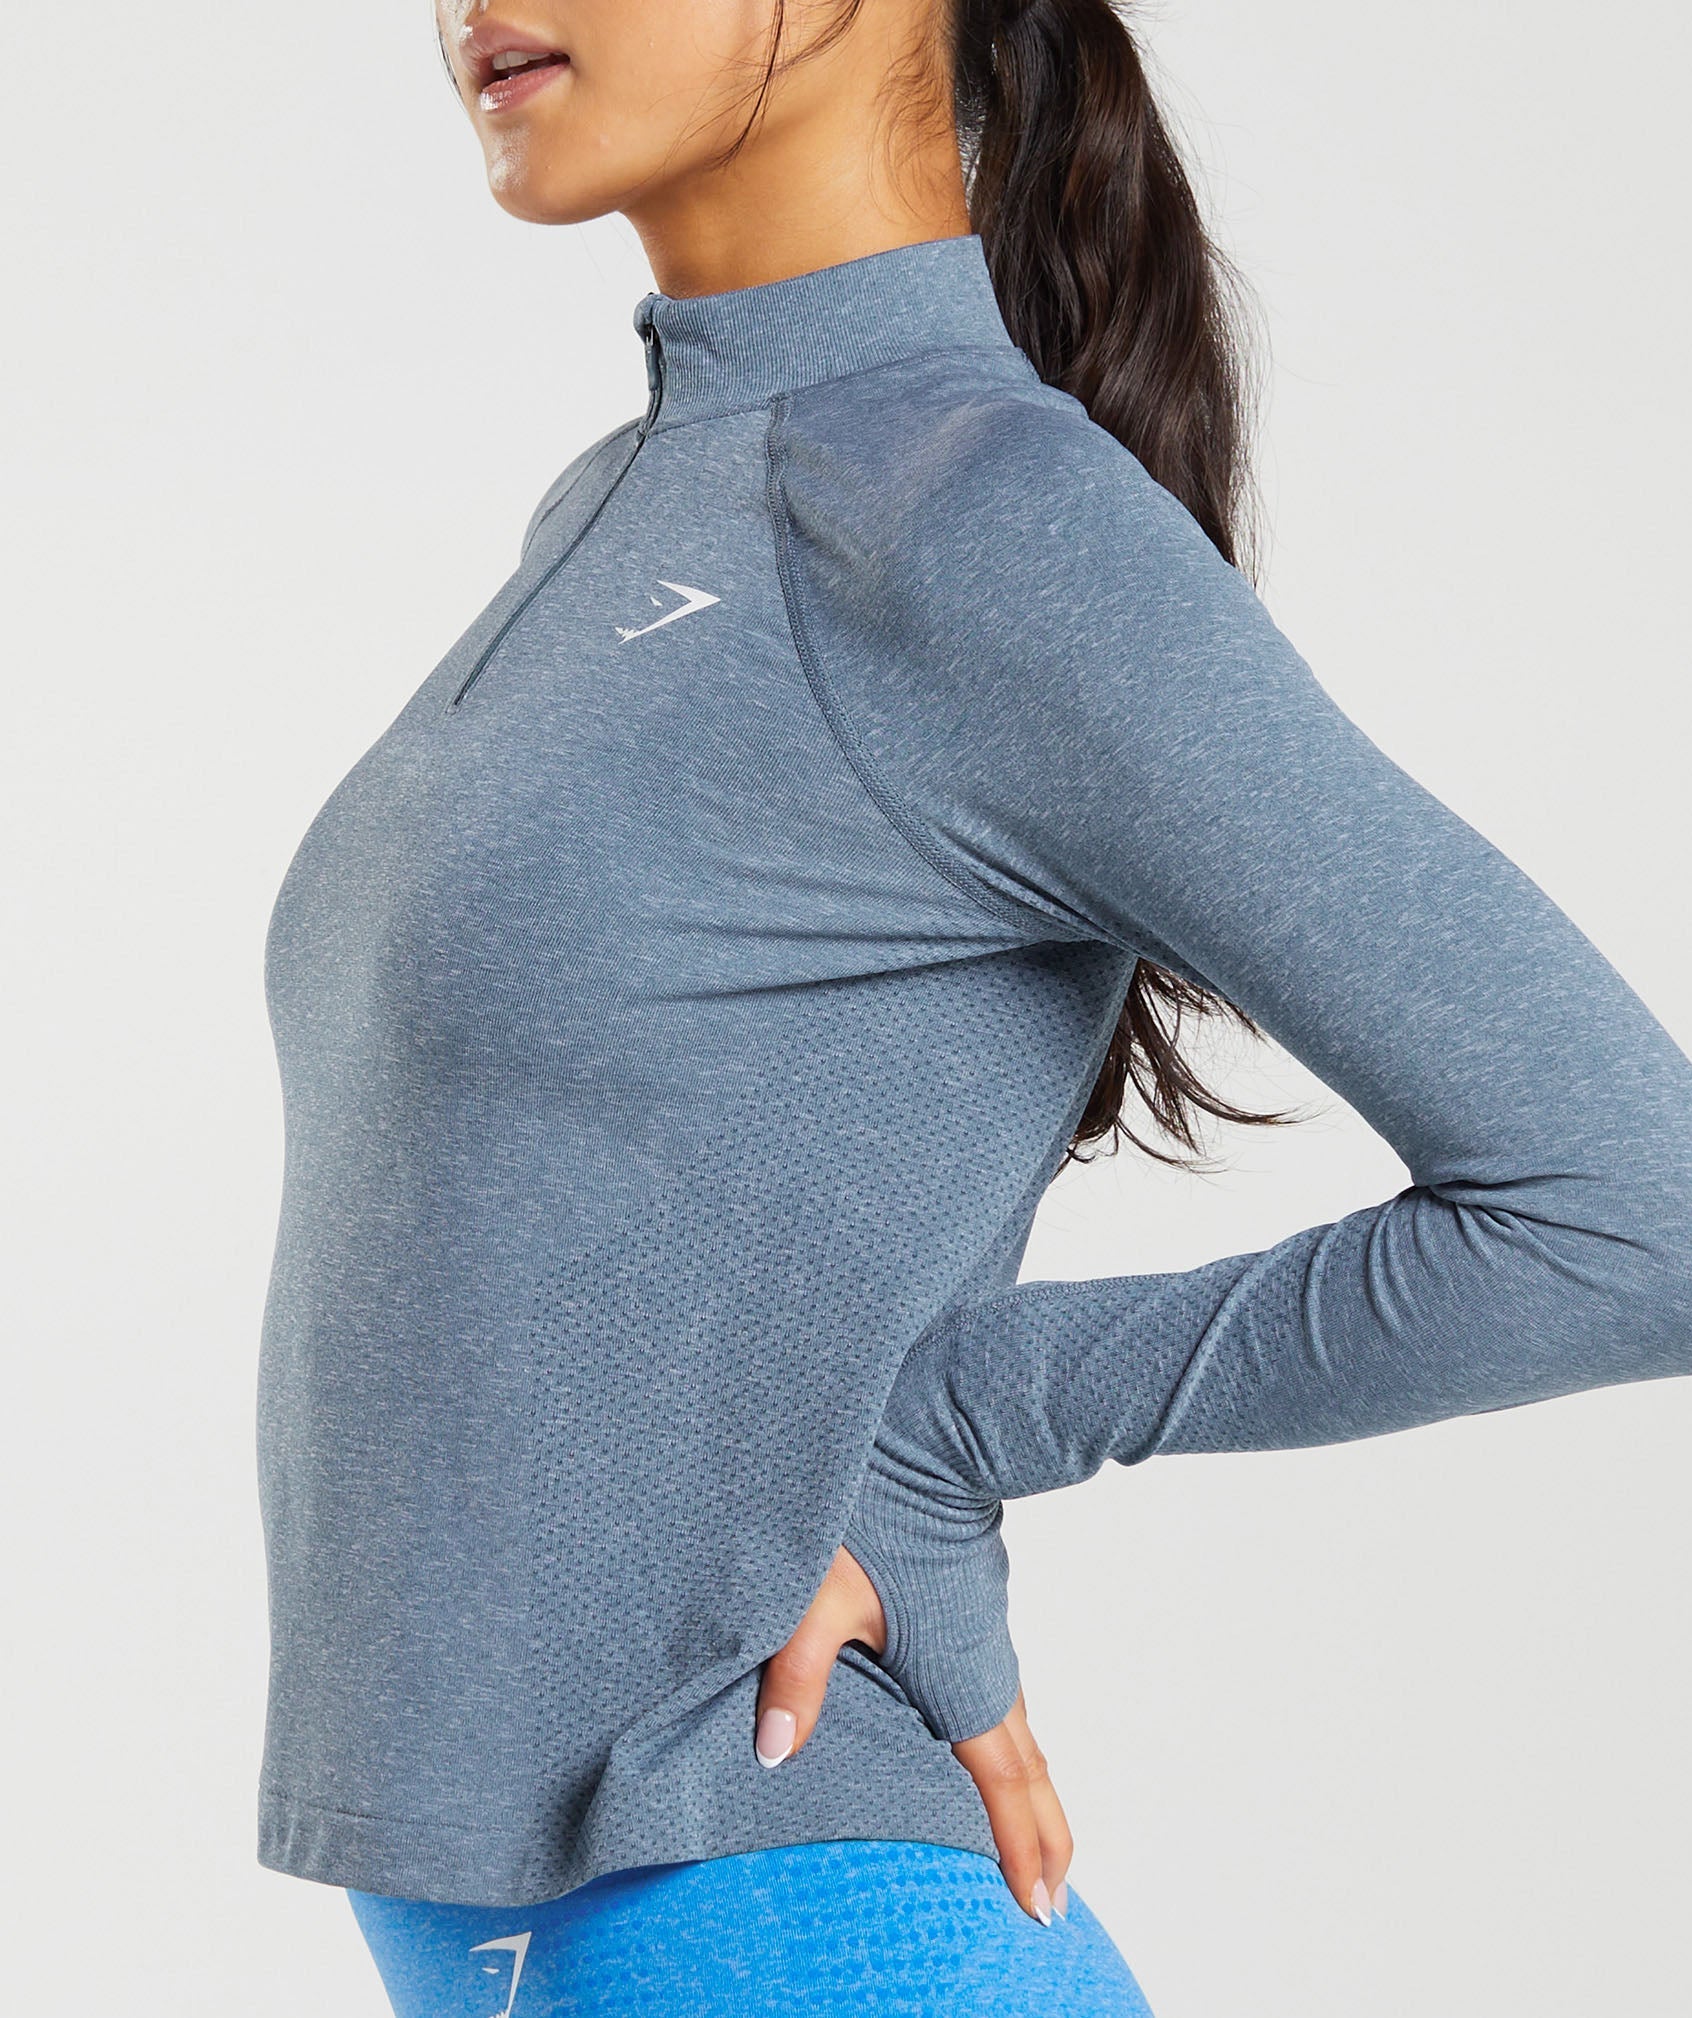 Vital Seamless 2.0 1/4 Track Top in Evening Blue Marl - view 3